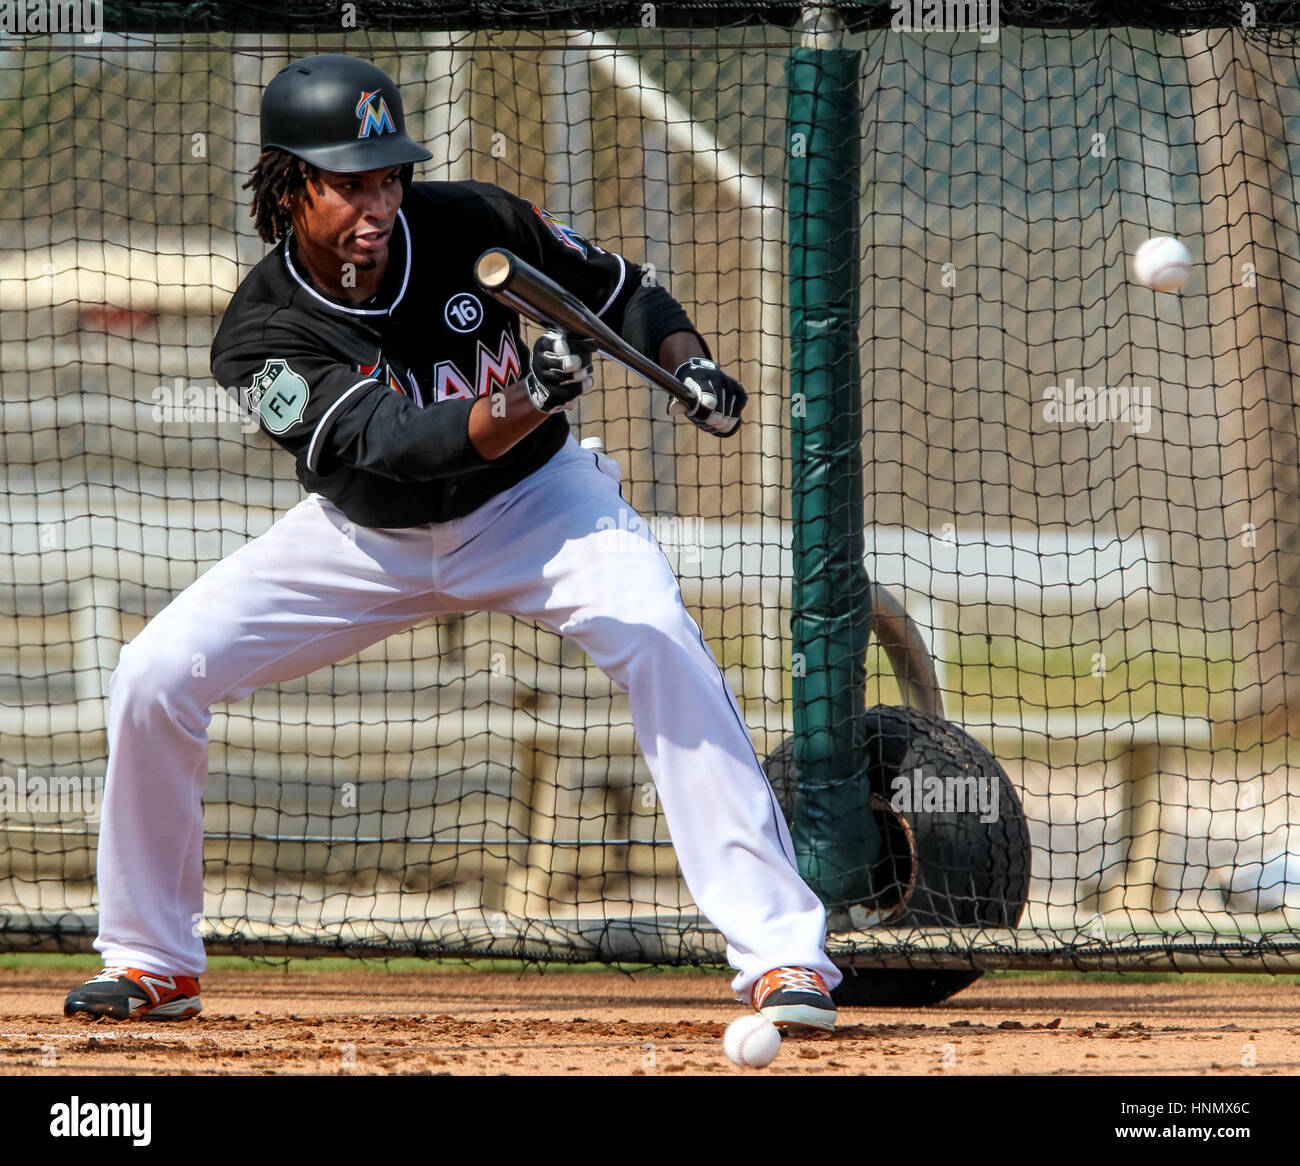 Florida, USA. 14th Feb, 2017. Florida Marlins pitcher #62 Jose Urena practices bunting during the first day of spring training at Roger Dean Stadium in Jupiter on February 14, 2017. Credit: Richard Graulich/The Palm Beach Post/ZUMA Wire/Alamy Live News Stock Photo